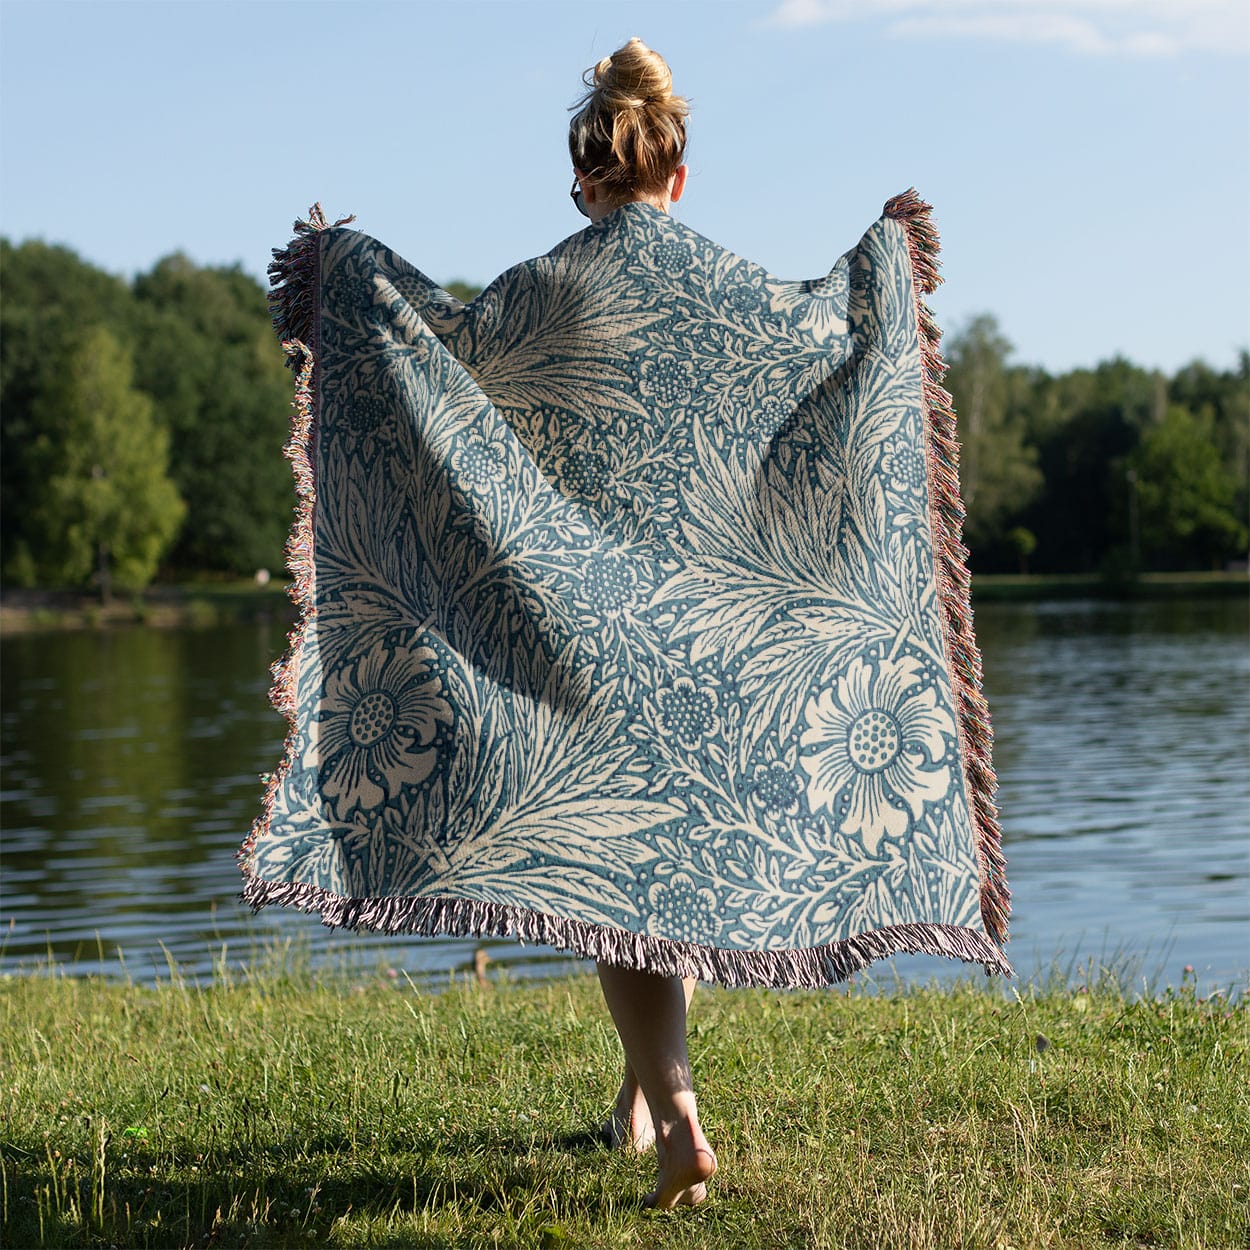 Floral Pattern Woven Blanket Held on a Woman's Back Outside